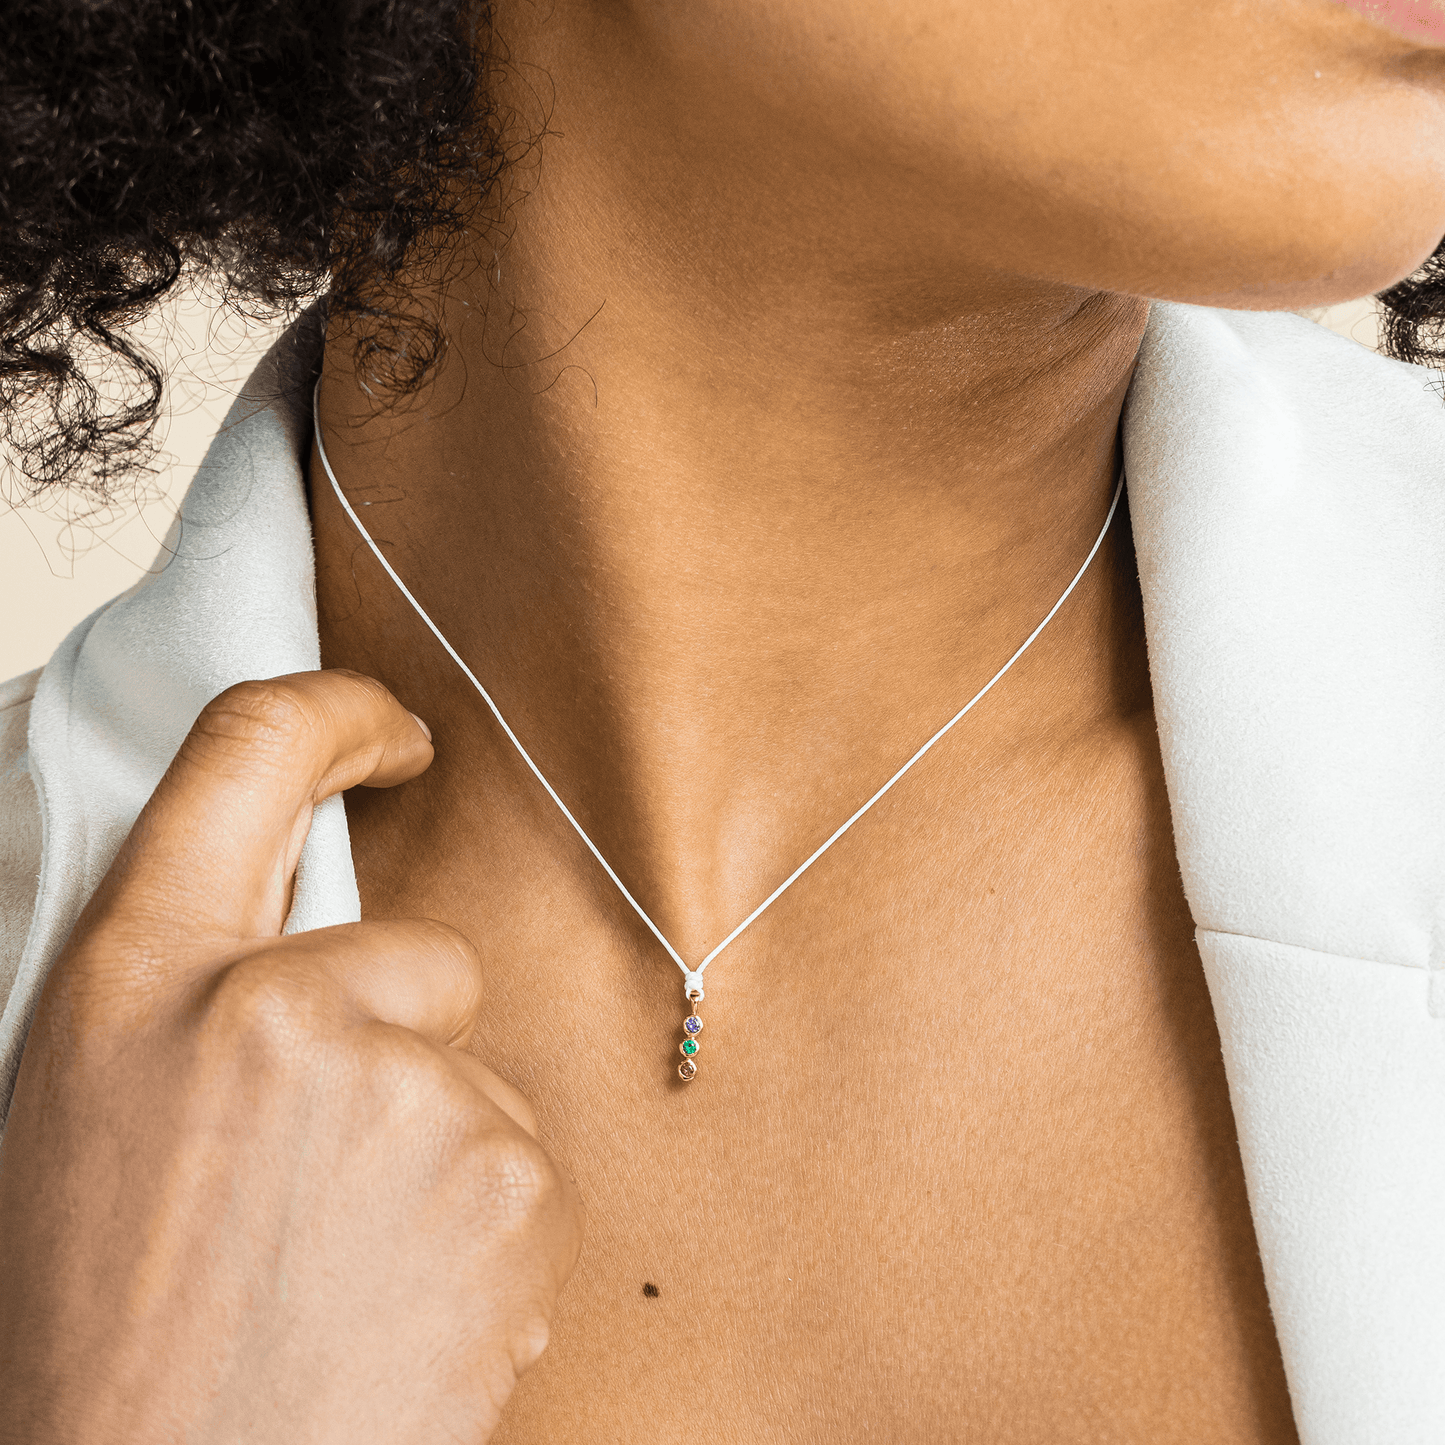 The Birthstones Bar Necklace - 14K White Gold Necklaces 14K Solid Gold 